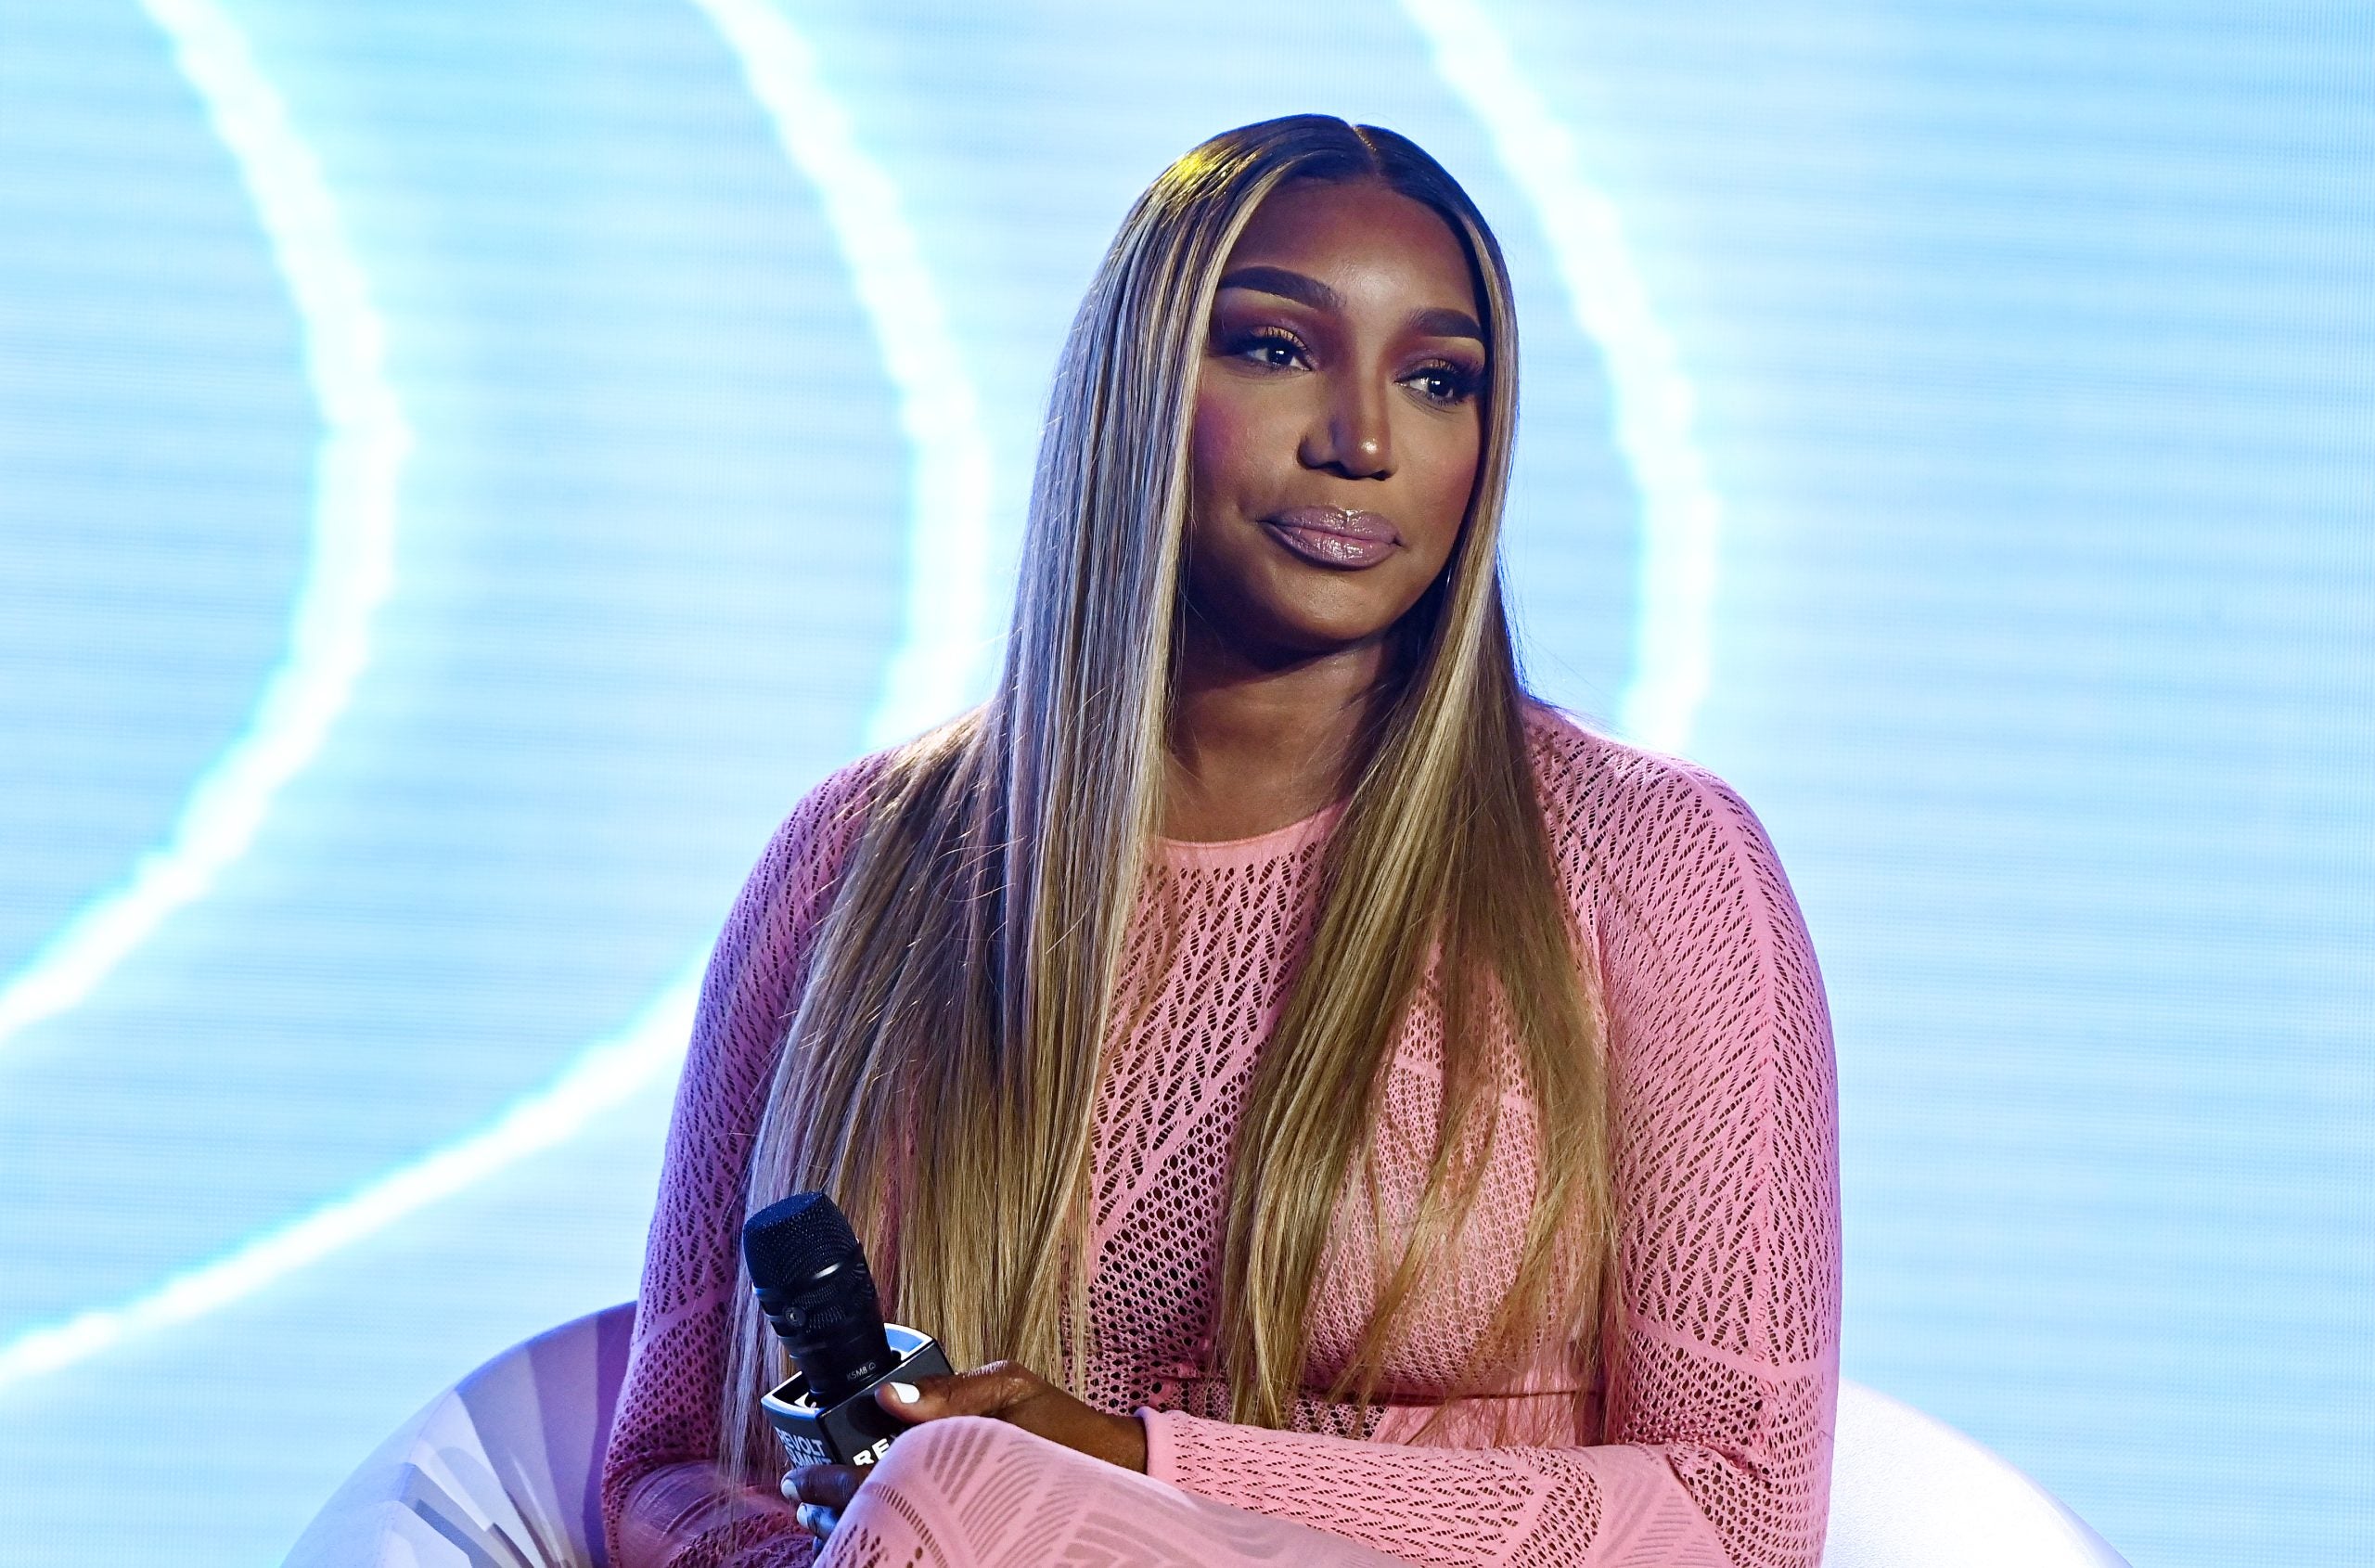 NeNe Leakes Says 'If You're Going To Cheat, You Need To Do It With Respect'